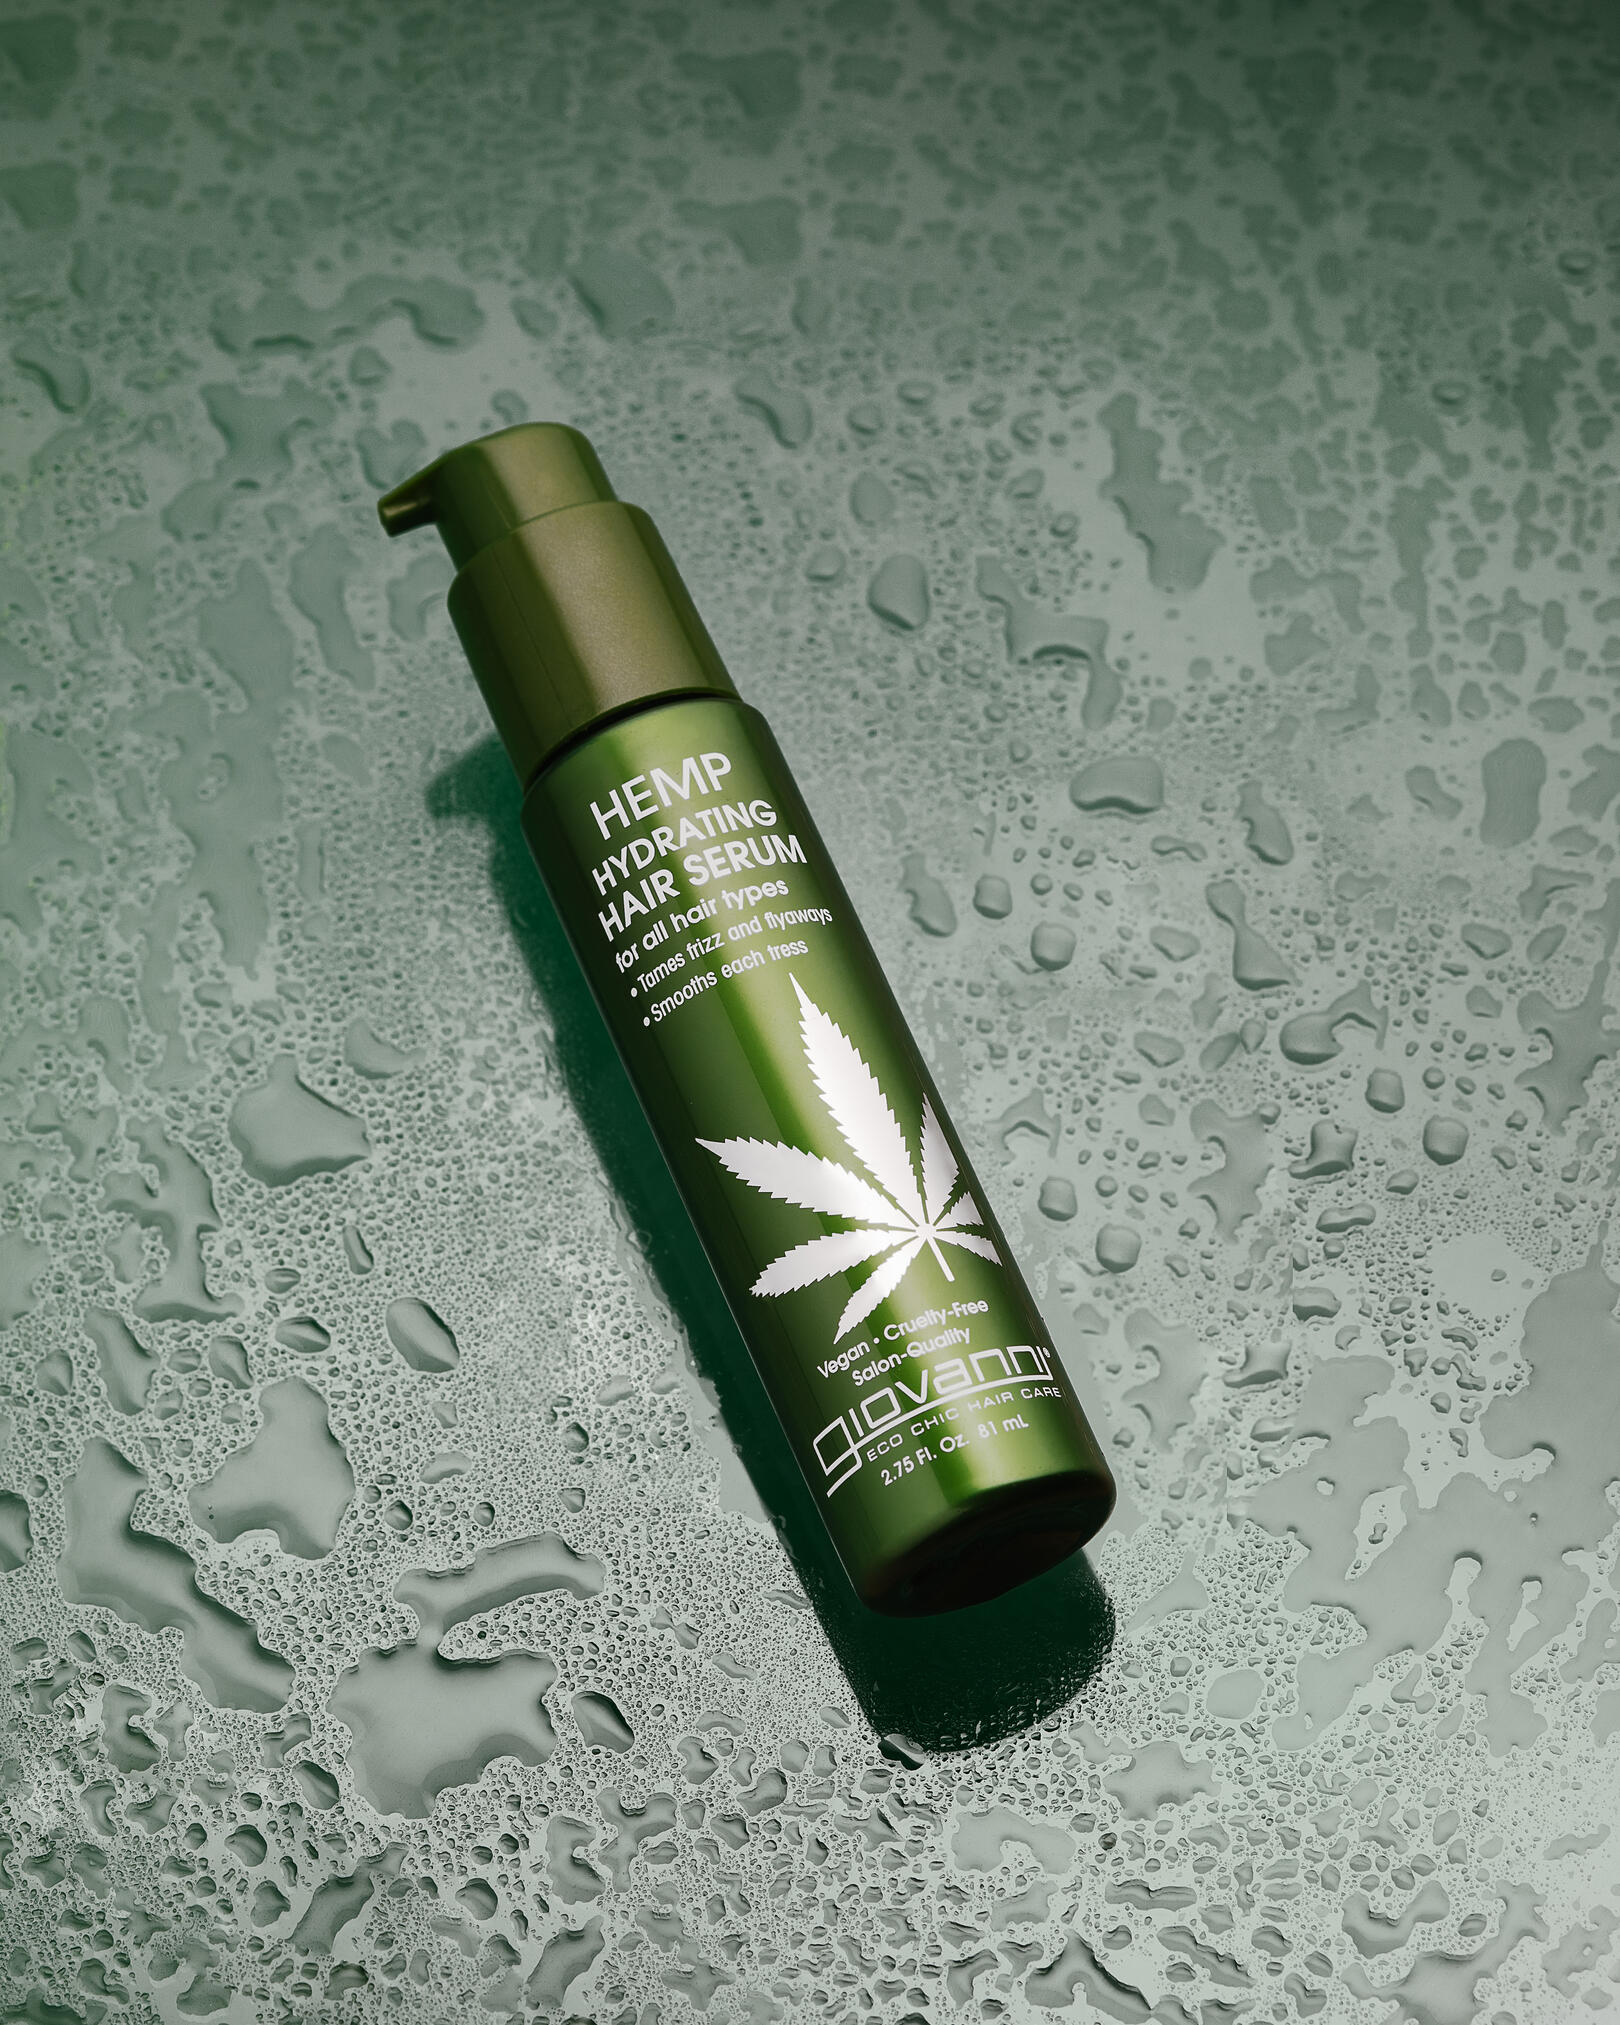 Giovanni Hemo Hydrating hair serum. Giovanni Hemo Hydrating hair serum lies on a green background with water drops. The product has moisturizing properties, which once again highlights the number of drops around the product. There is a shadow under the jar.